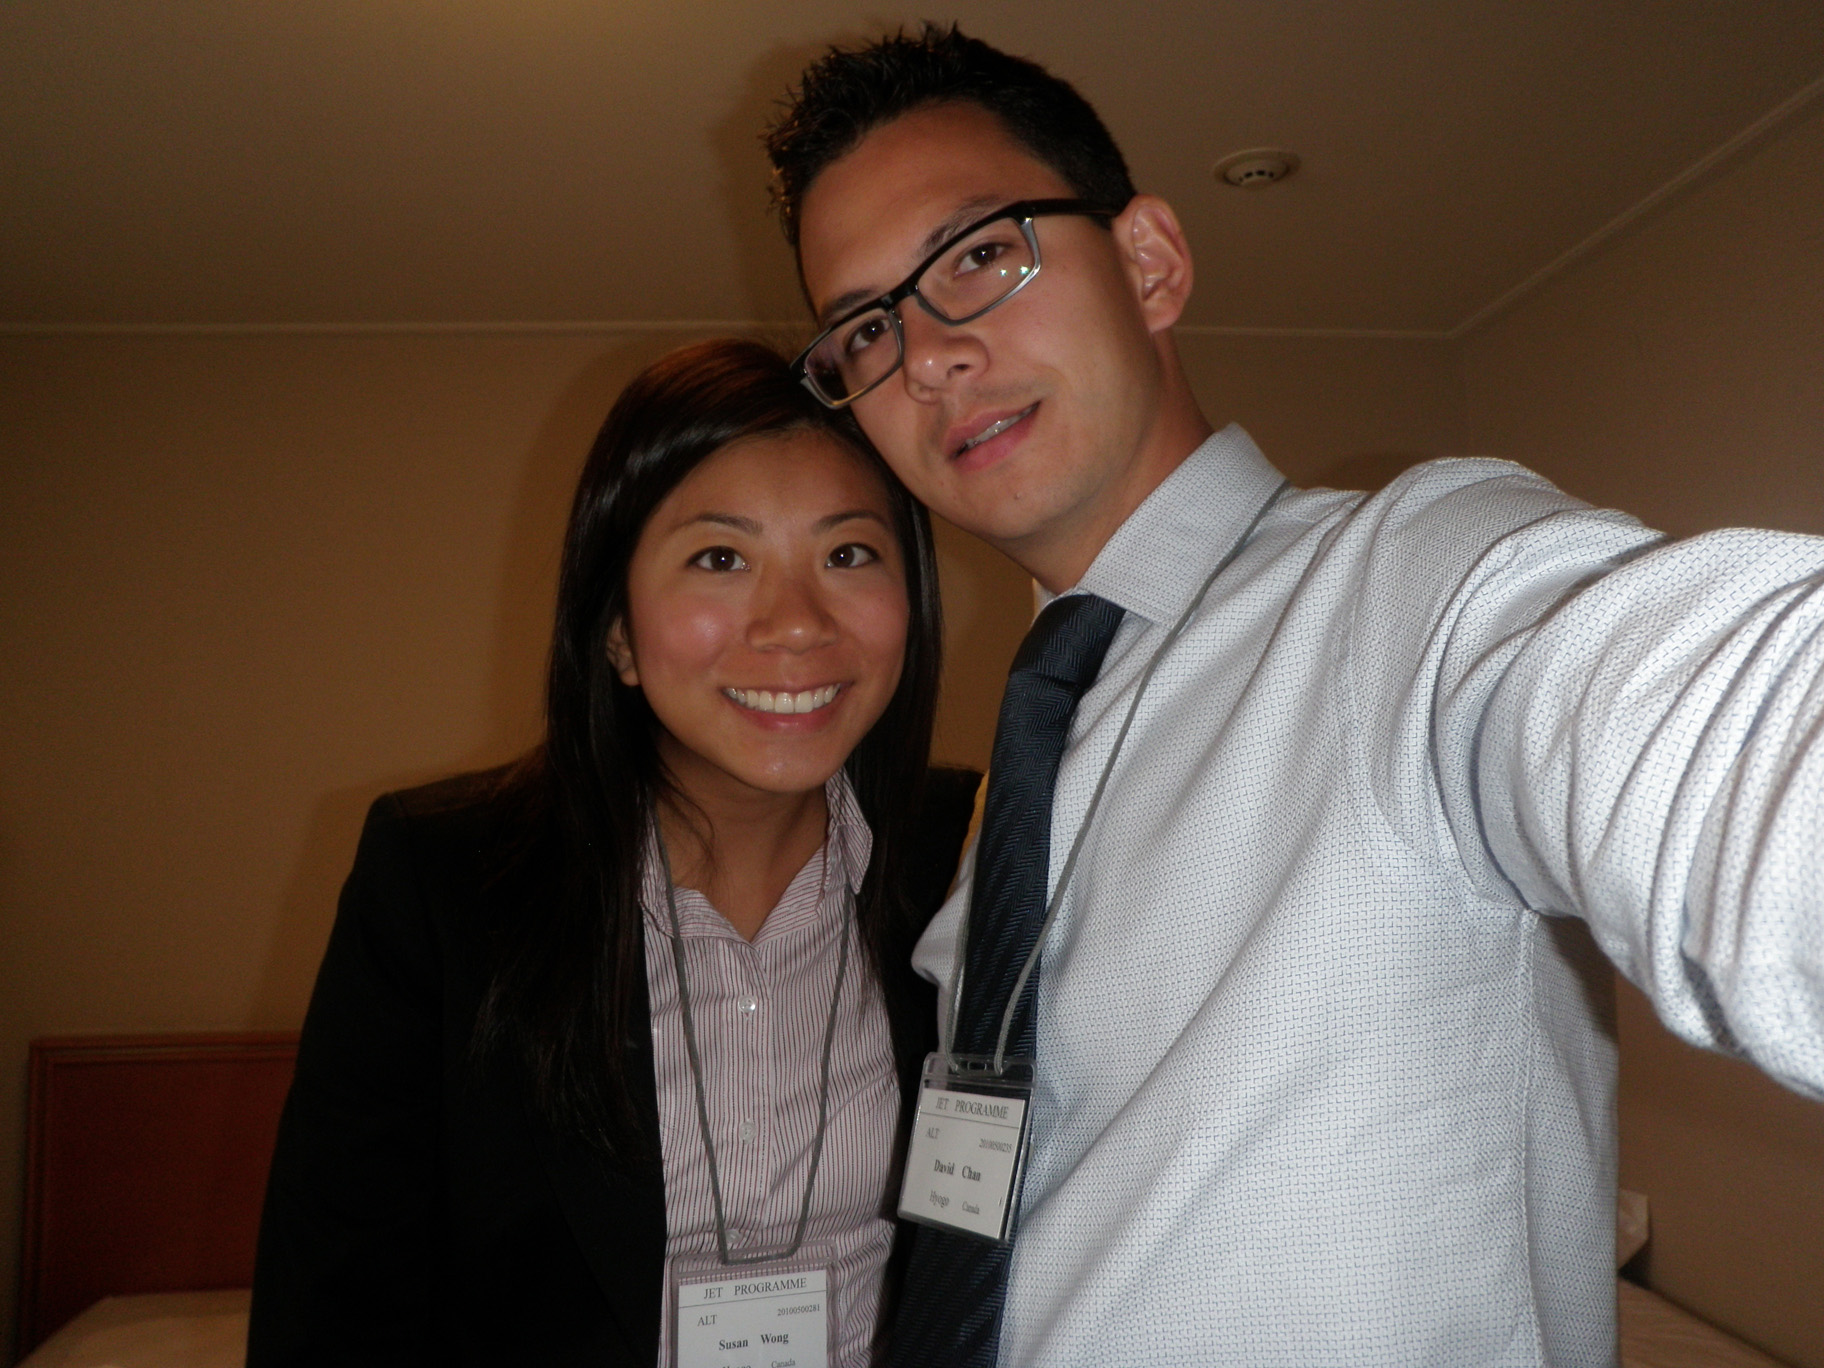 Where Are They Now: David Chan and Susan Wong (Kobe 2010-2011)